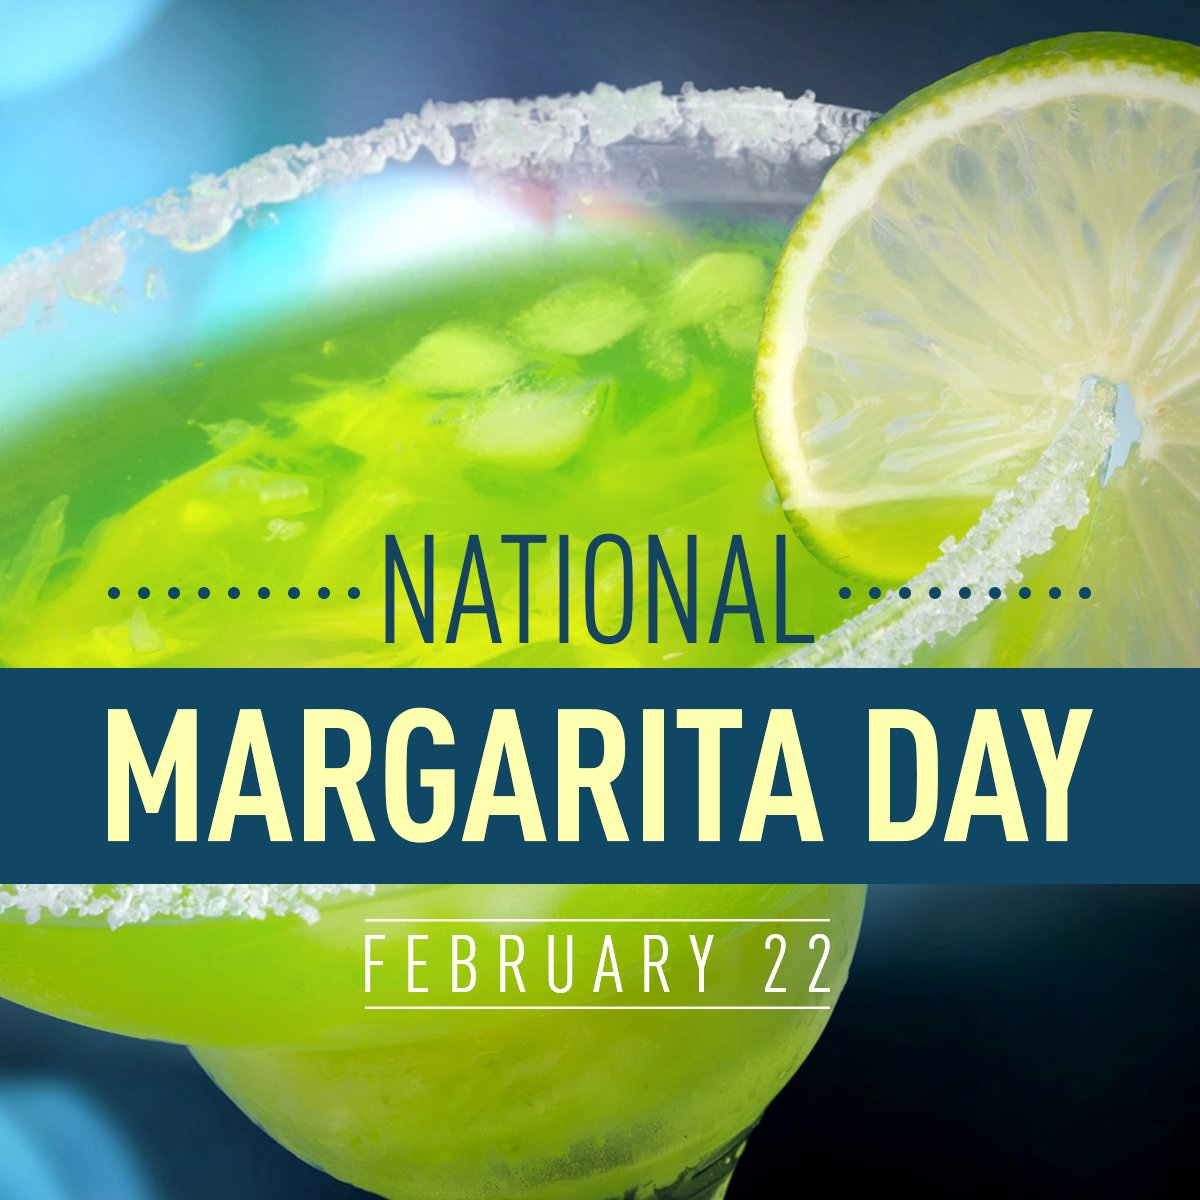 Today is national margarita day! who makes the best margaritas in